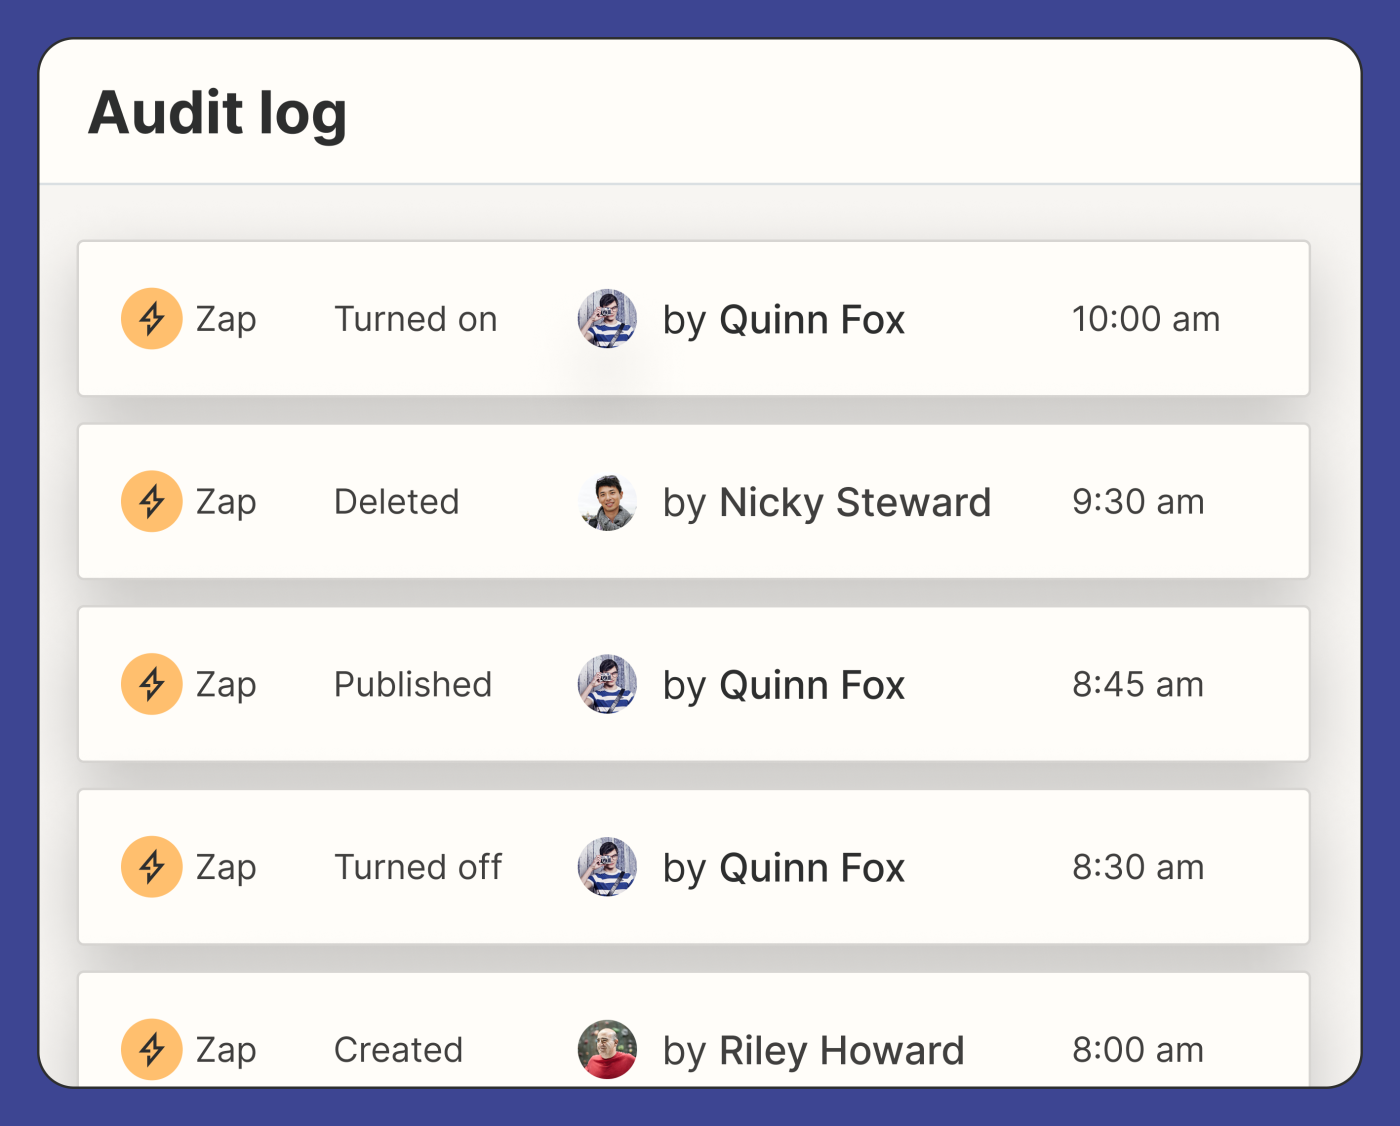 An audit log in Zapier that displays changes made to a Zap, who changed each Zap, and when.